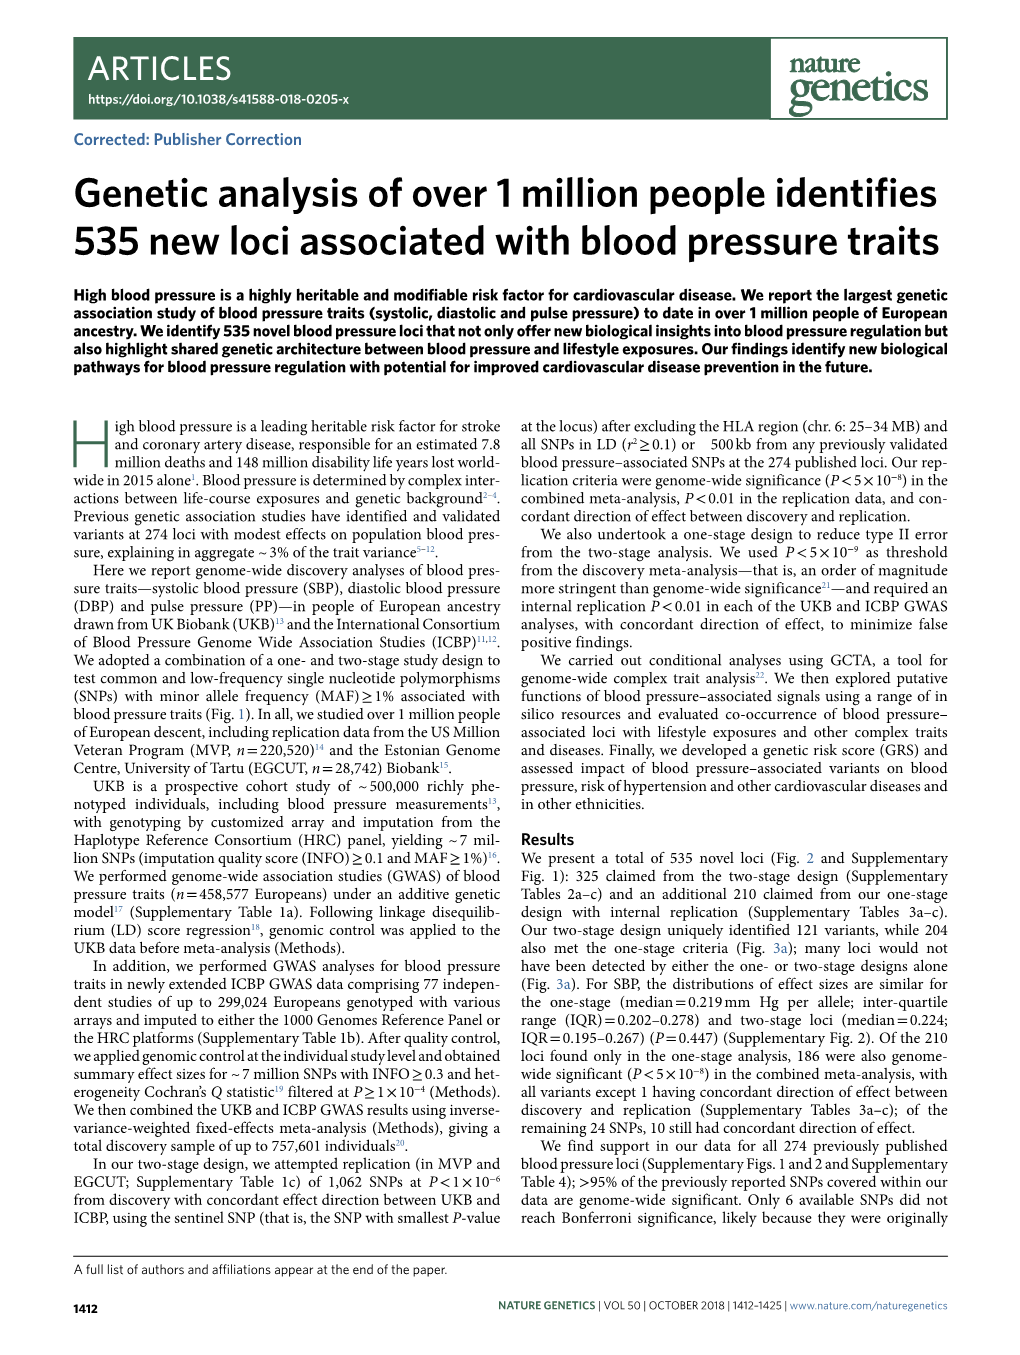 Genetic Analysis of Over 1 Million People Identifies 535 New Loci Associated with Blood Pressure Traits